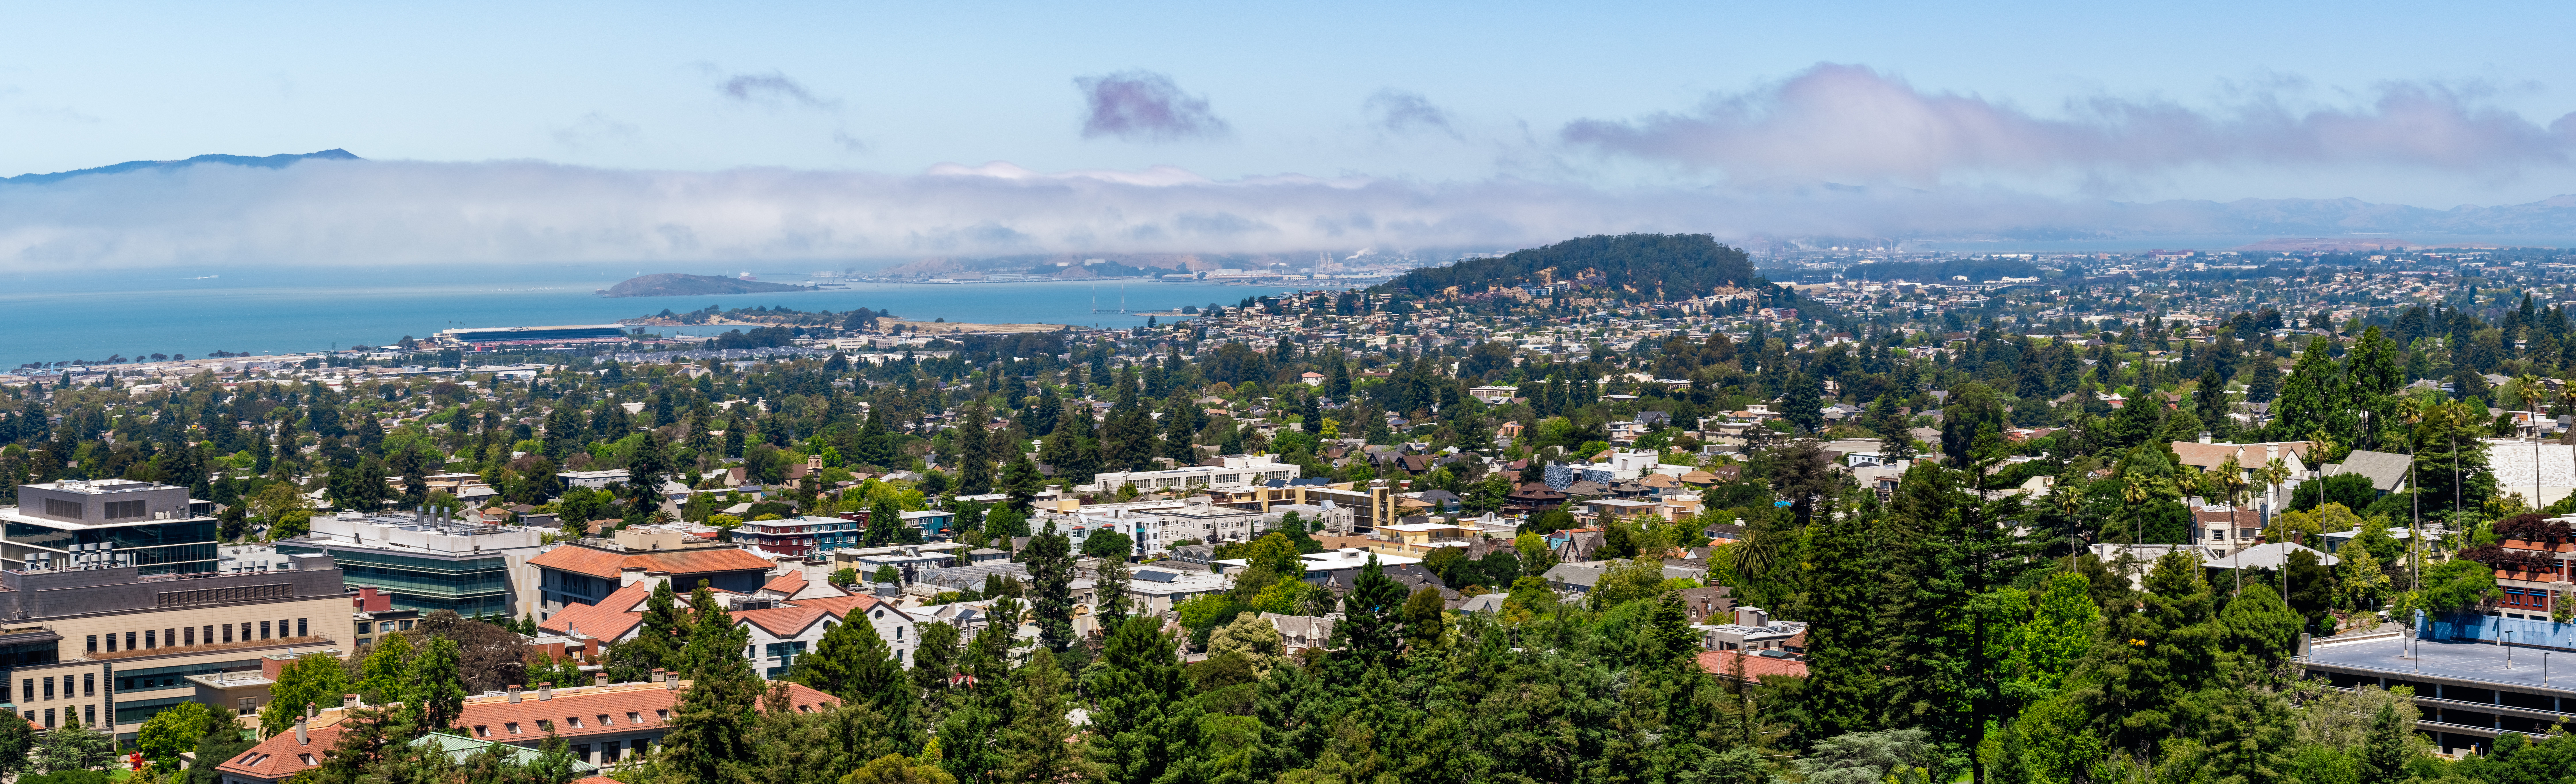 View towards Berkeley, Richmond and the San Francisco bay area shoreline on a sunny day; University of California Berkeley campus buildings in the foreground, California